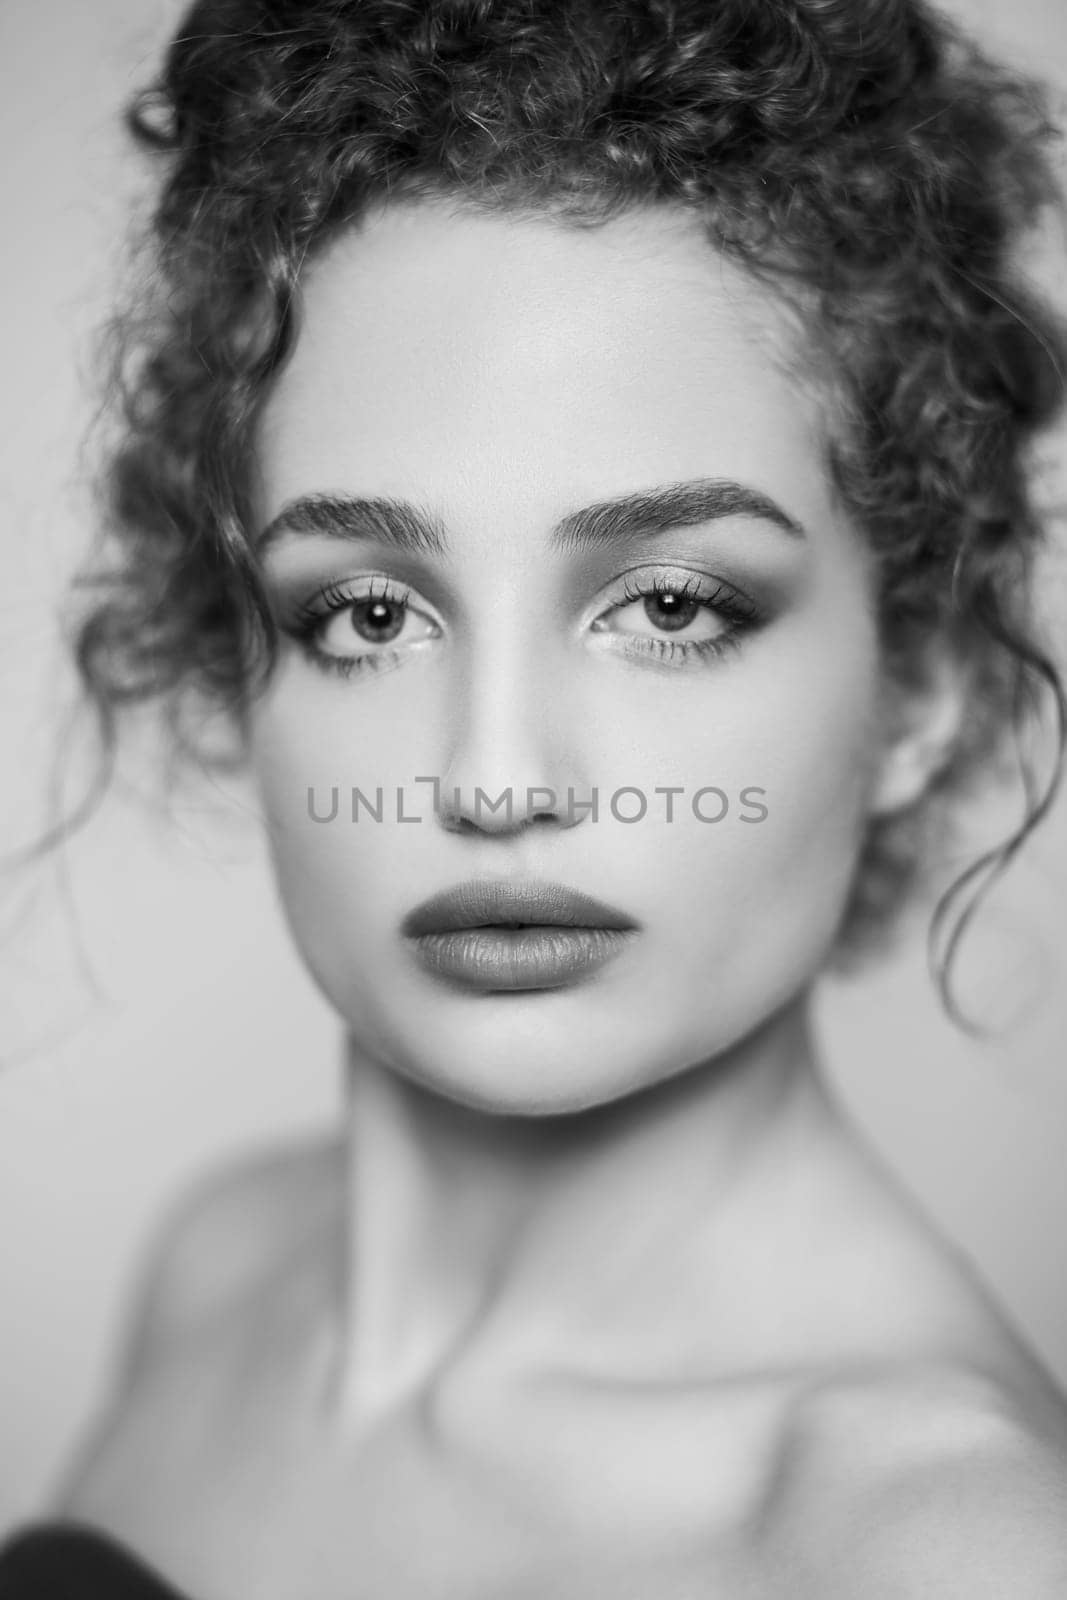 Black and white beauty portrait of young attractive woman fashion model with collected dark curly hair, looking at camera with serious face. Indoor studio shot isolated on gray background.